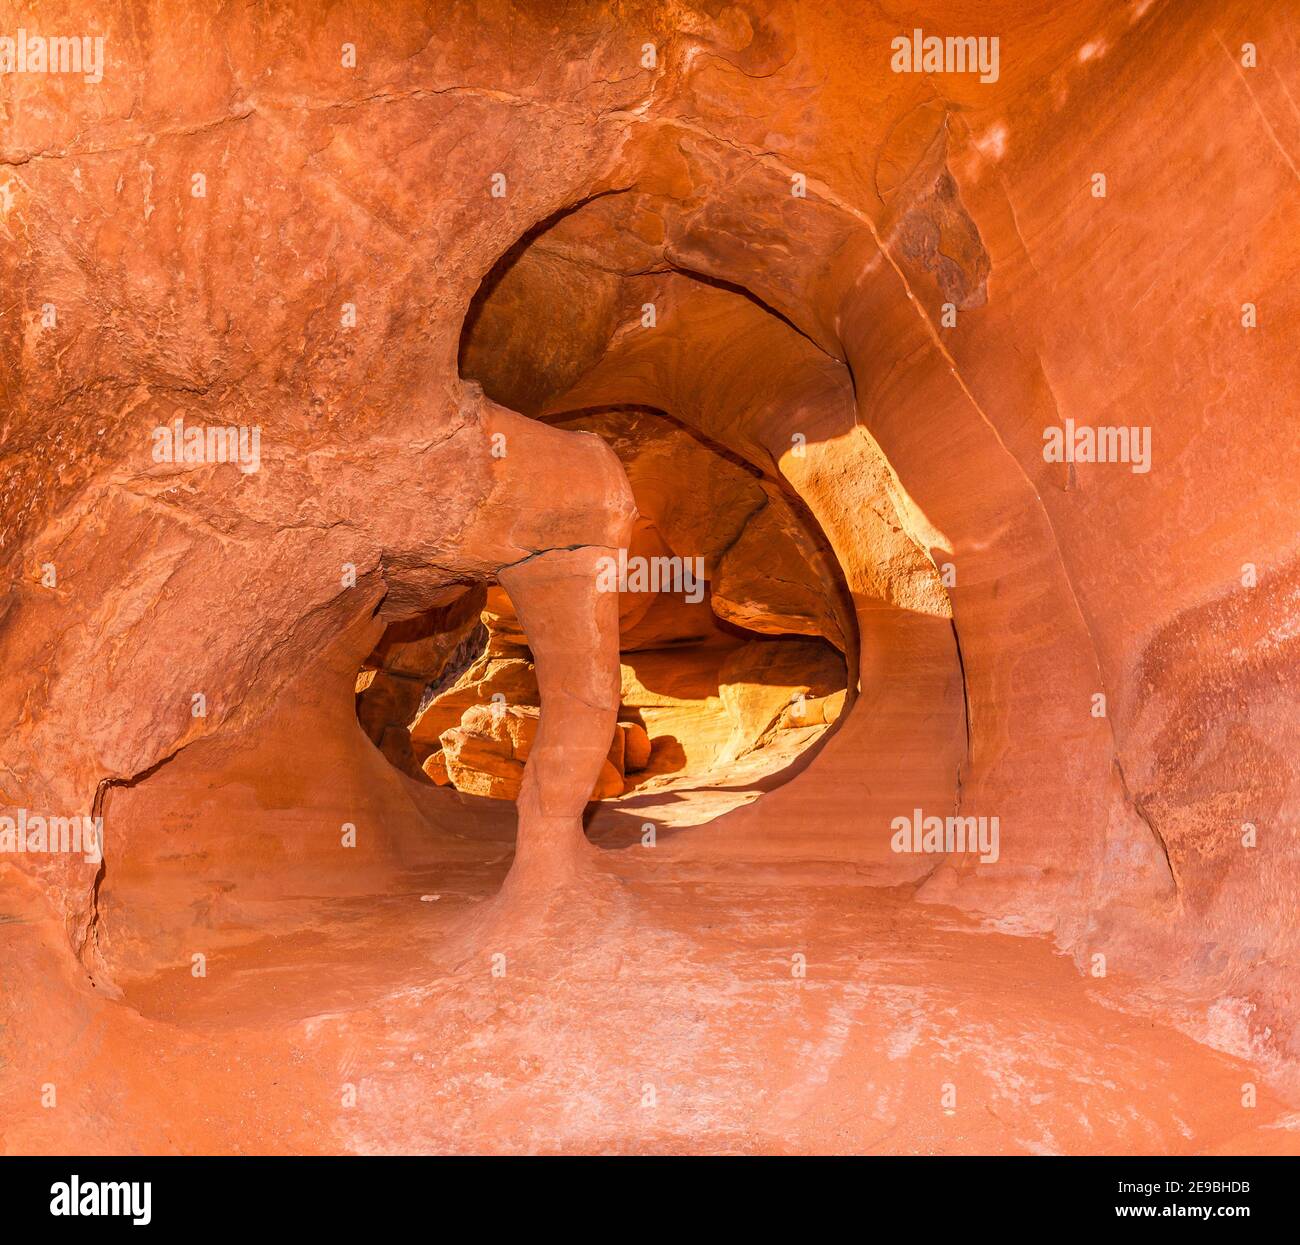 Fire Cave aka Windstone Arch, Valley of Fire State Park, Nevada, USA Stockfoto